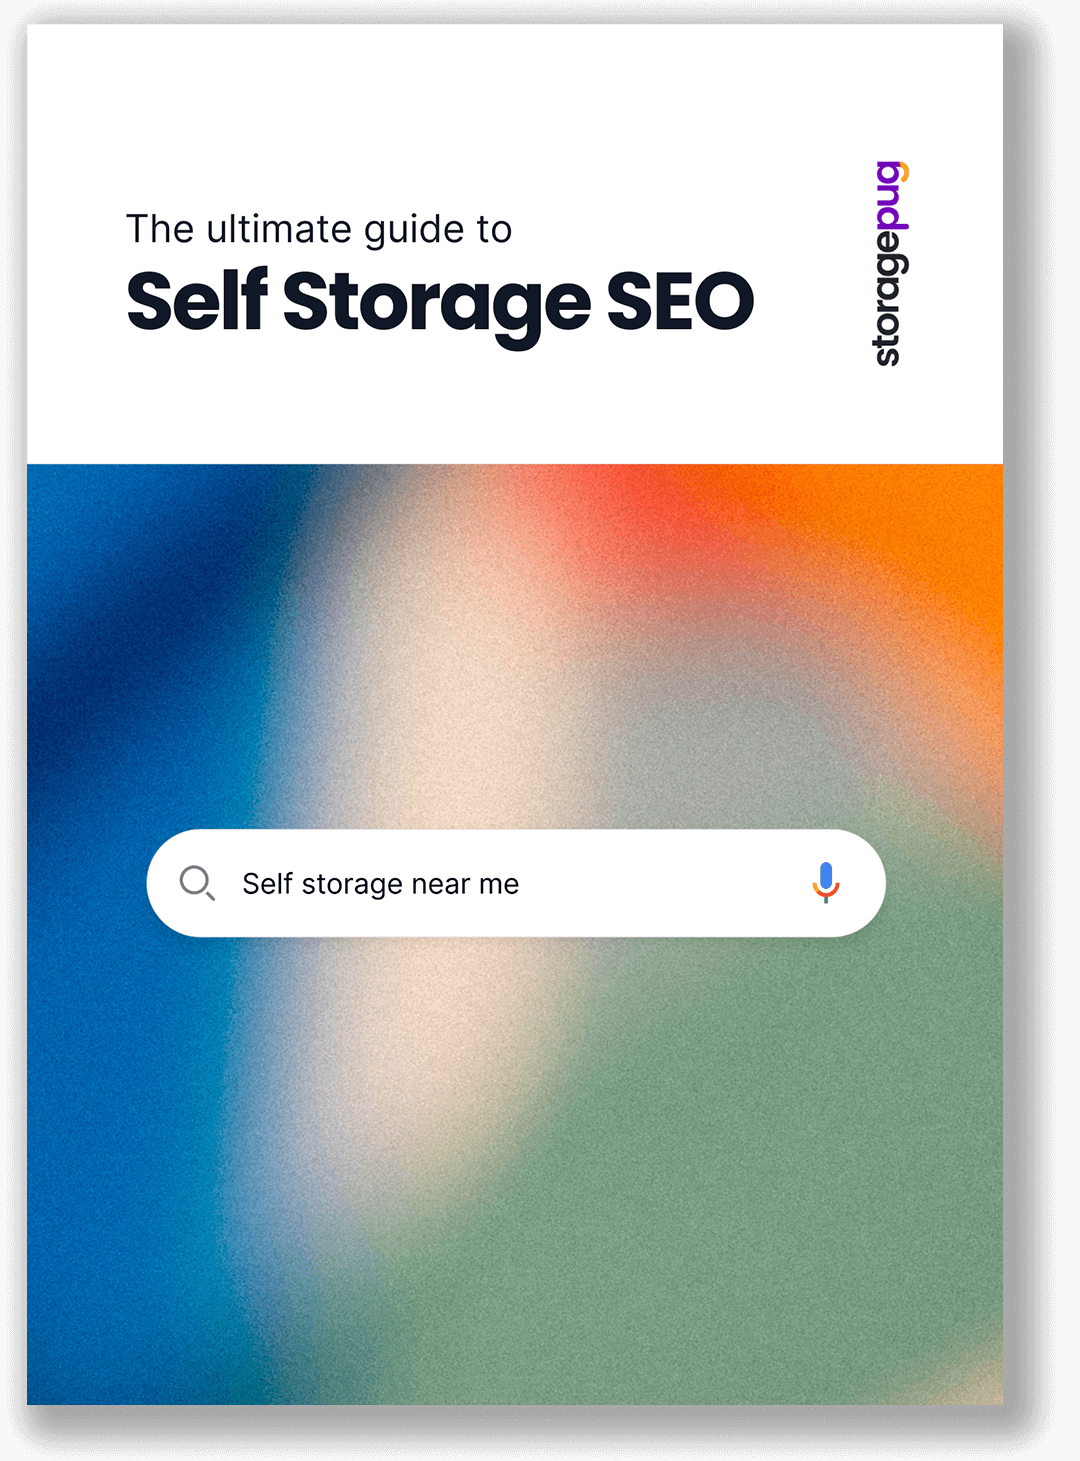 The Ultimate Guide to Self Storage SEO